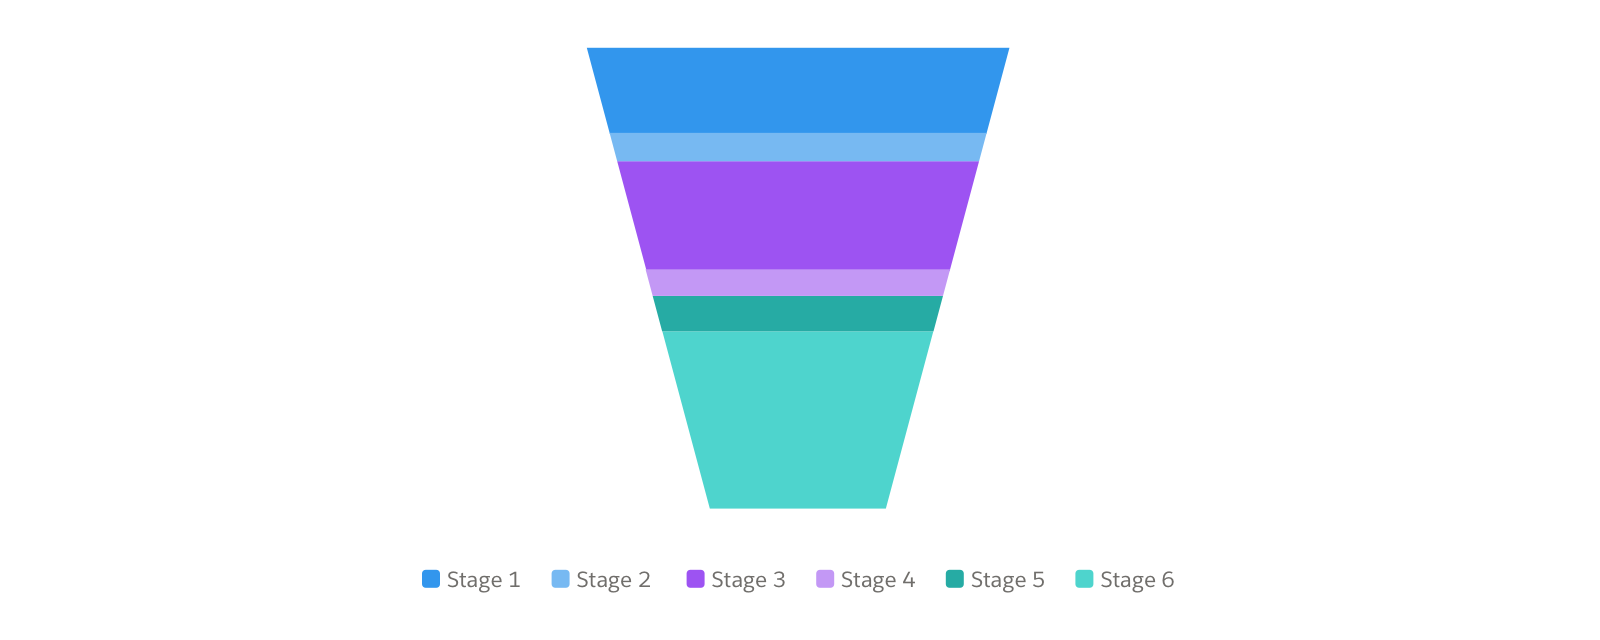 A funnel chart showing opportunity by stage